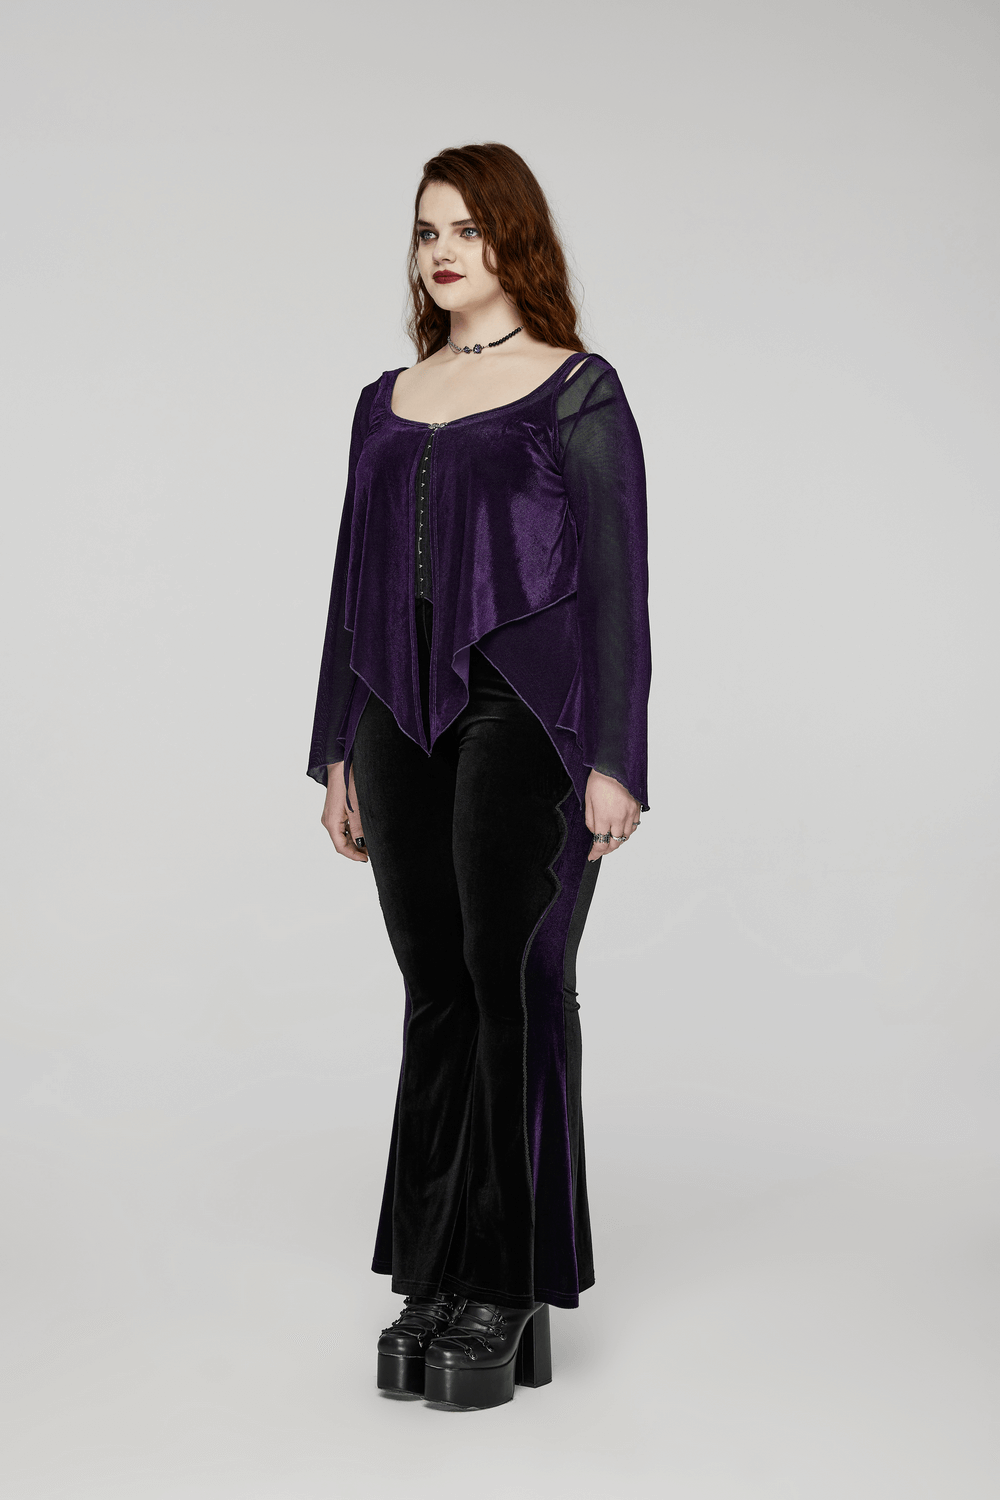 Gothic Women's Layered Mesh Top with Gorgeous Lace Hooks